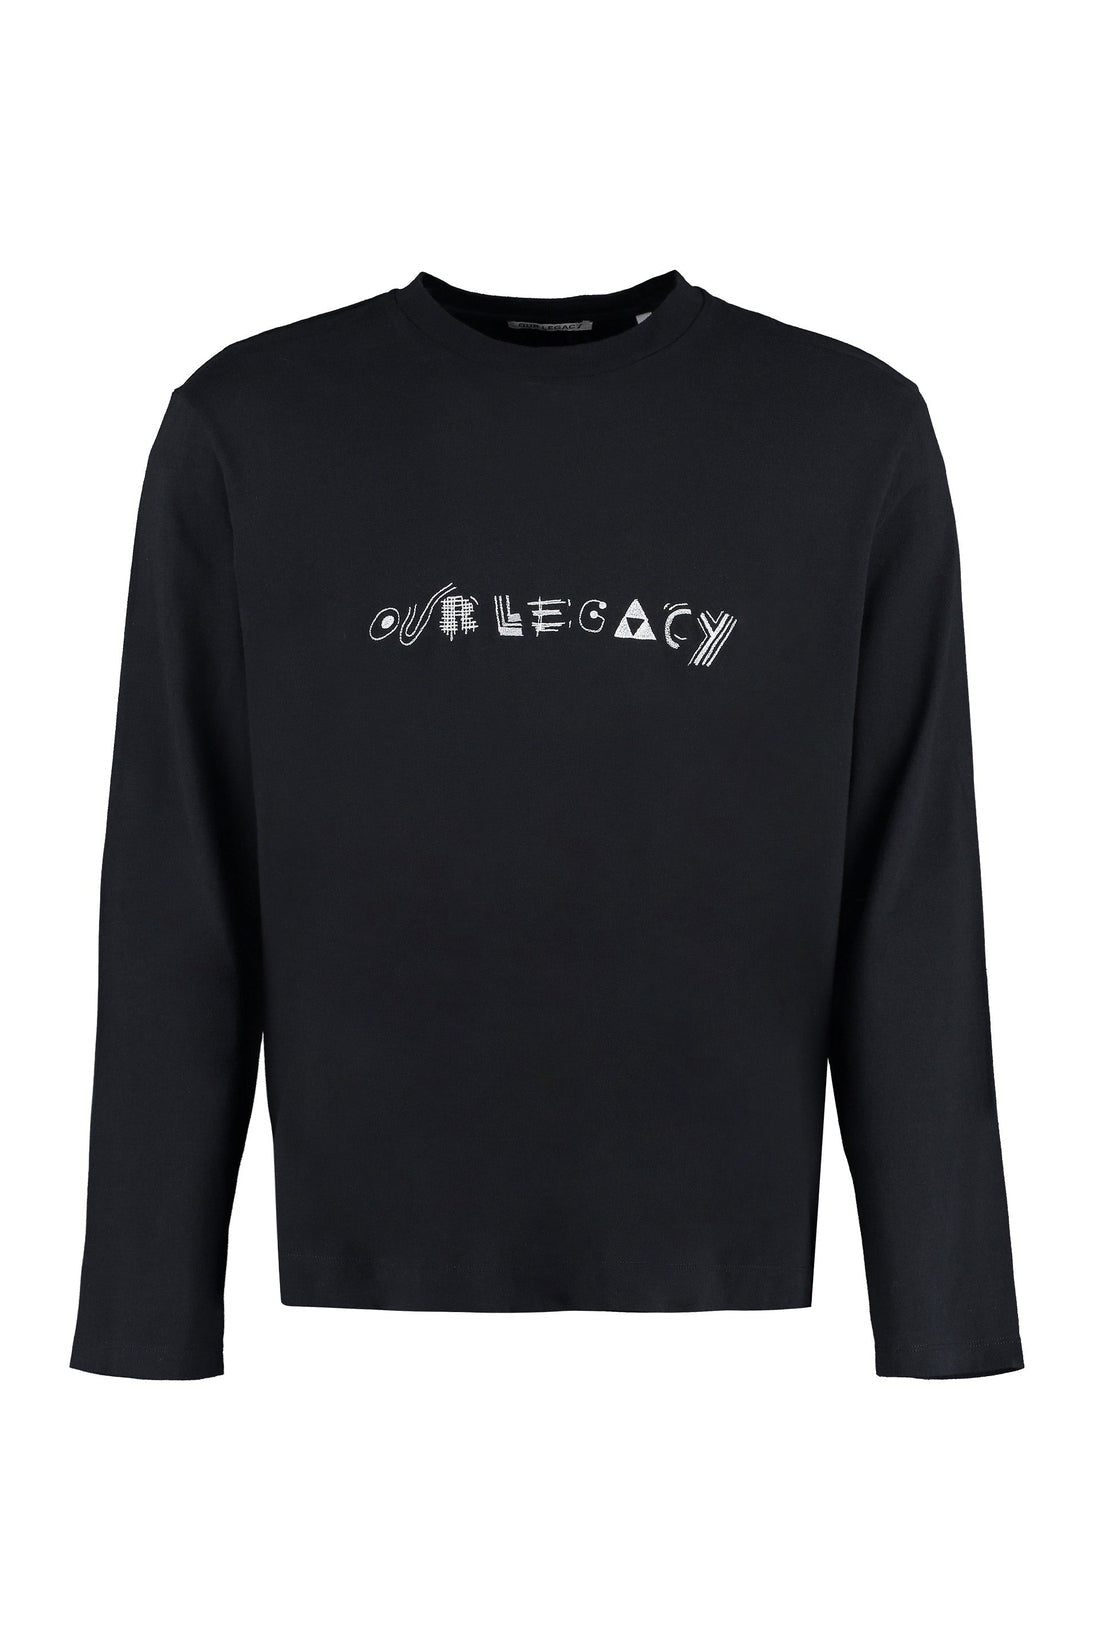 Our Legacy-OUTLET-SALE-Embroidered cotton T-shirt-ARCHIVIST